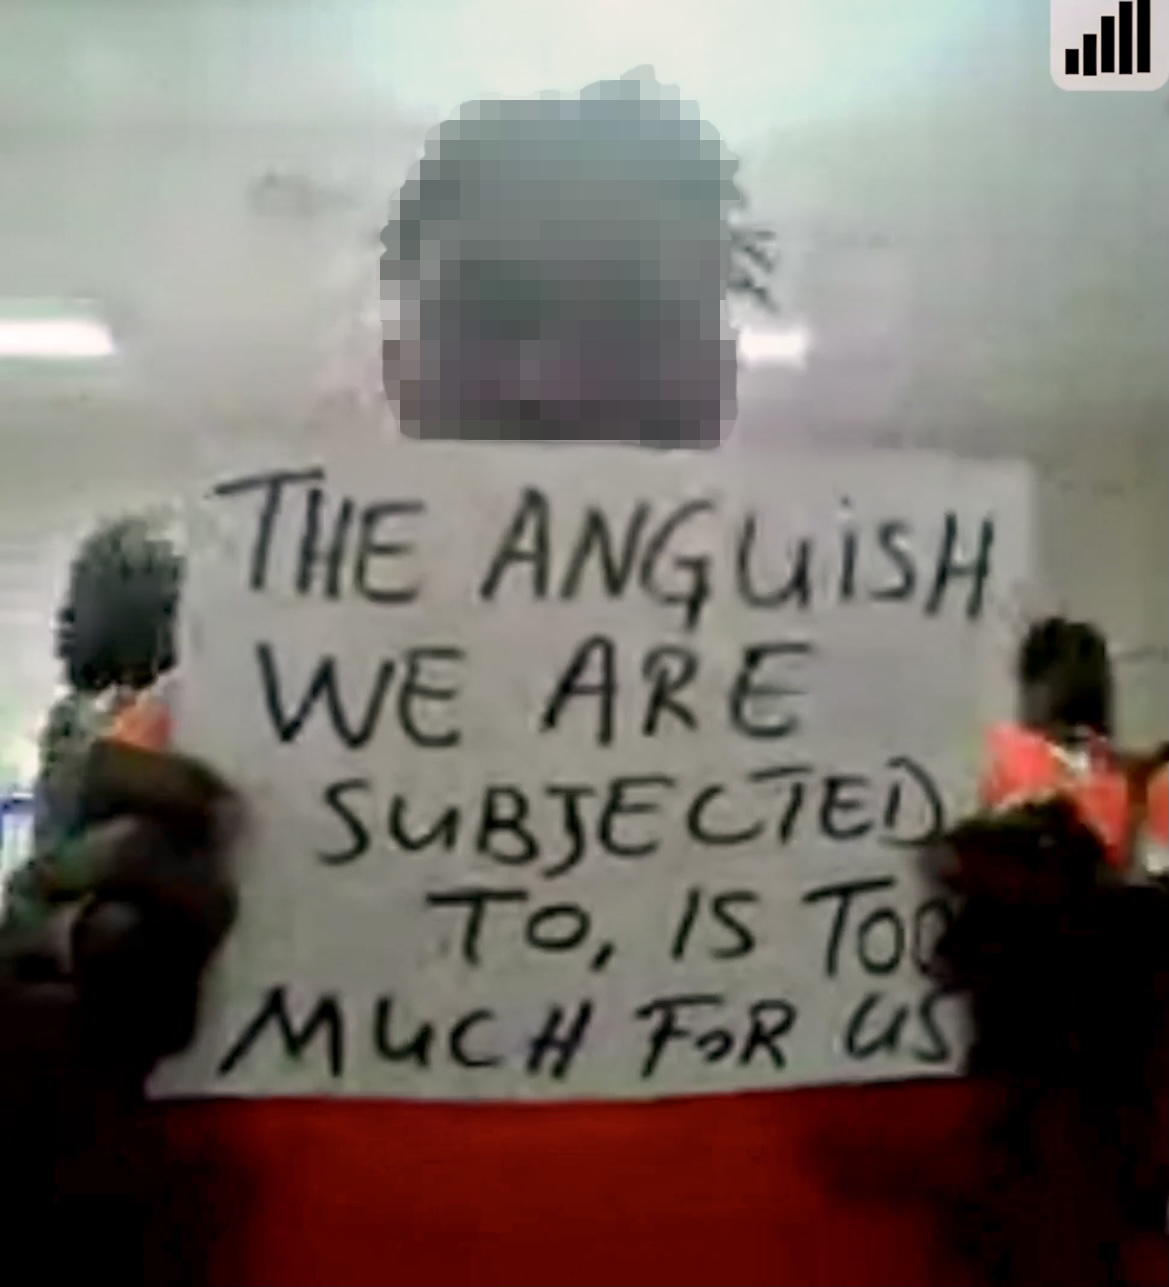 A man with a blurred face holds up a sign from inside a detention center